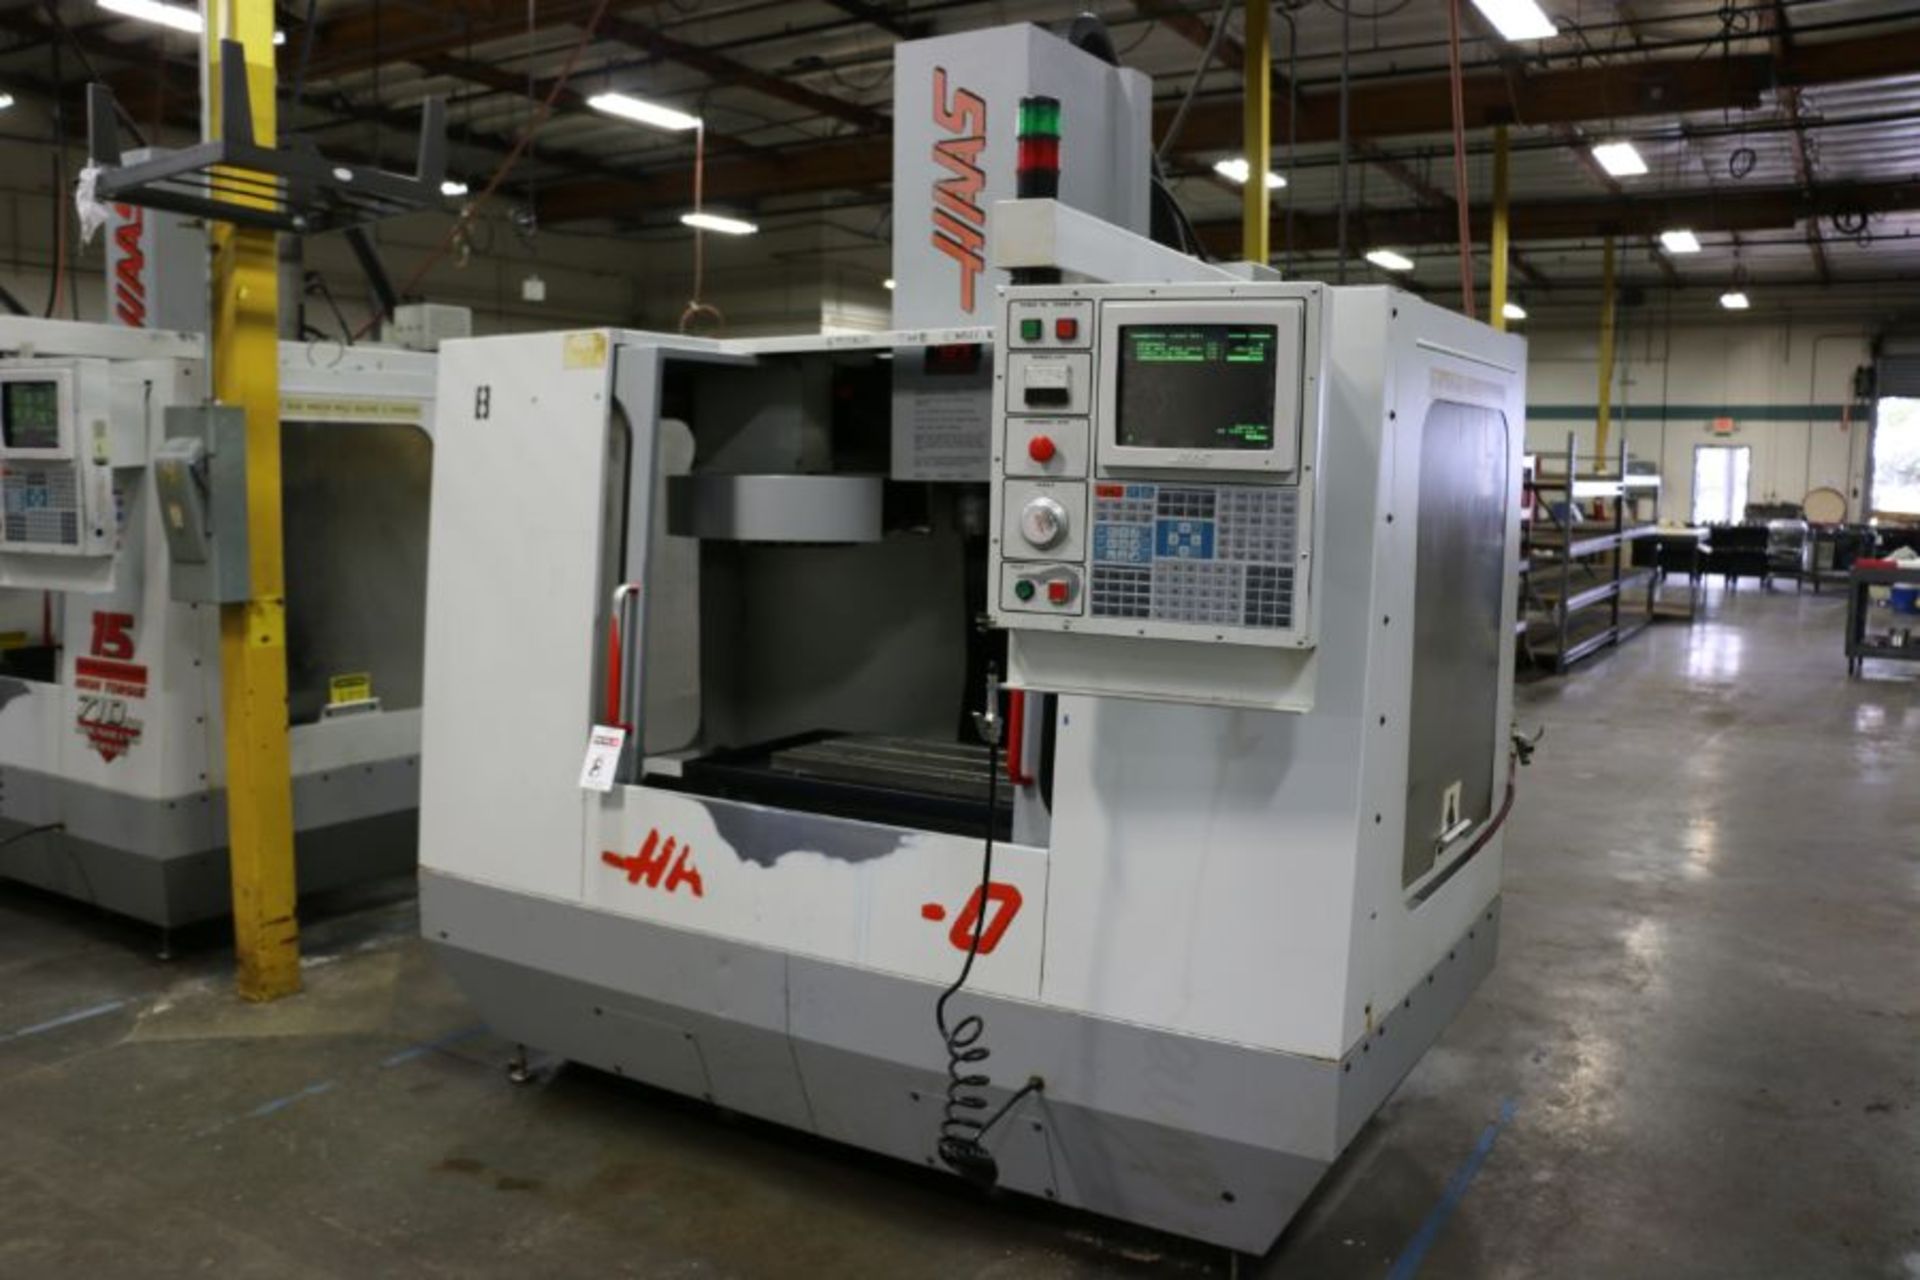 Haas VF-0, 20” x 16” x 20” Travels, 20 Position Tool Carousel, CT-40 Taper, s/n 4411, New 1995 - Image 6 of 11